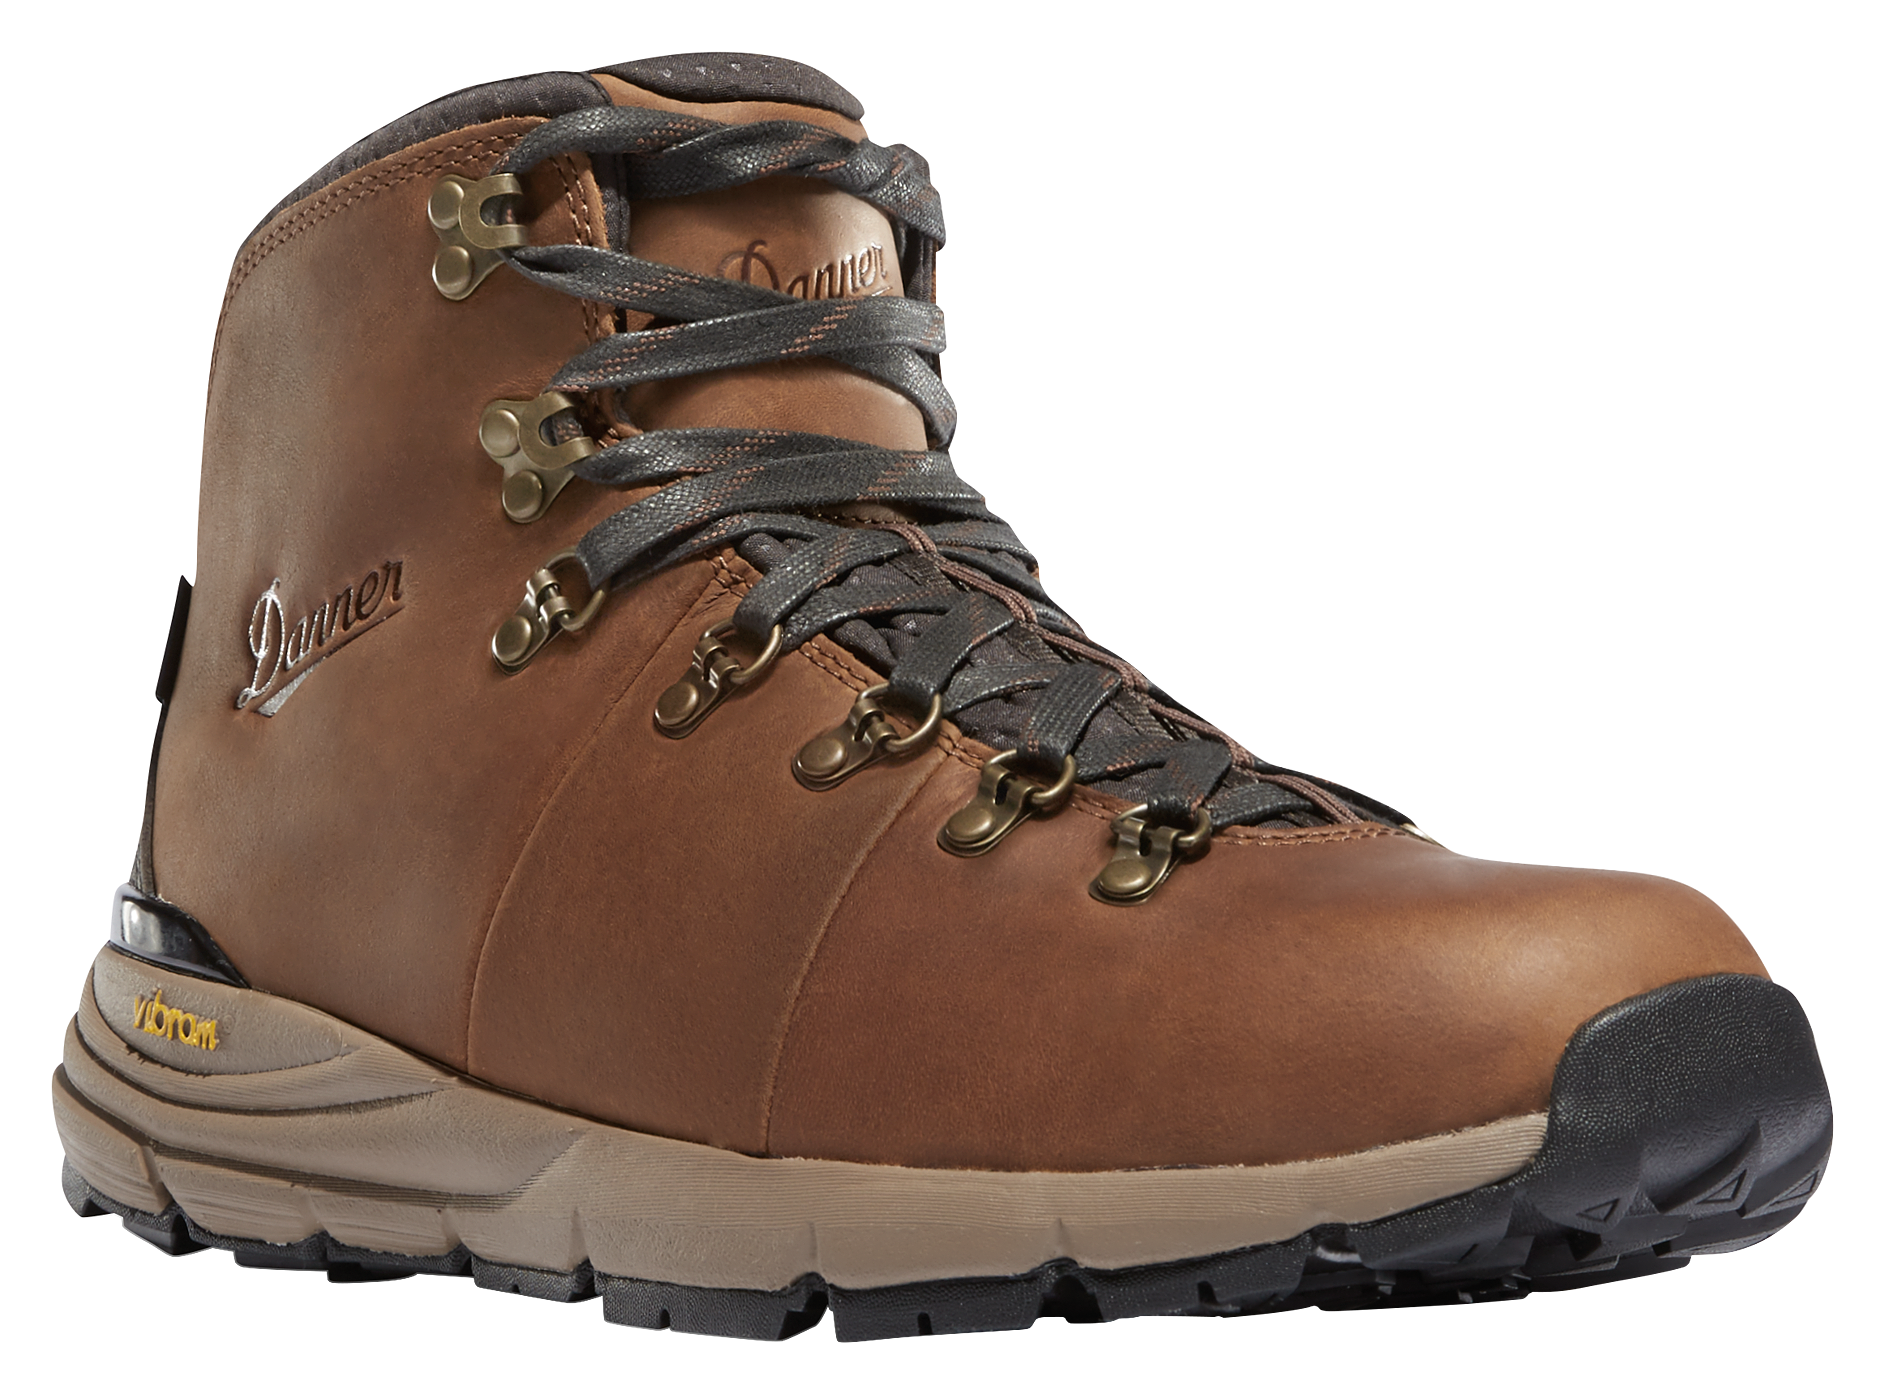 Danner Mountain 600 Waterproof Hiking Boots for Men - Rich Brown - 13M